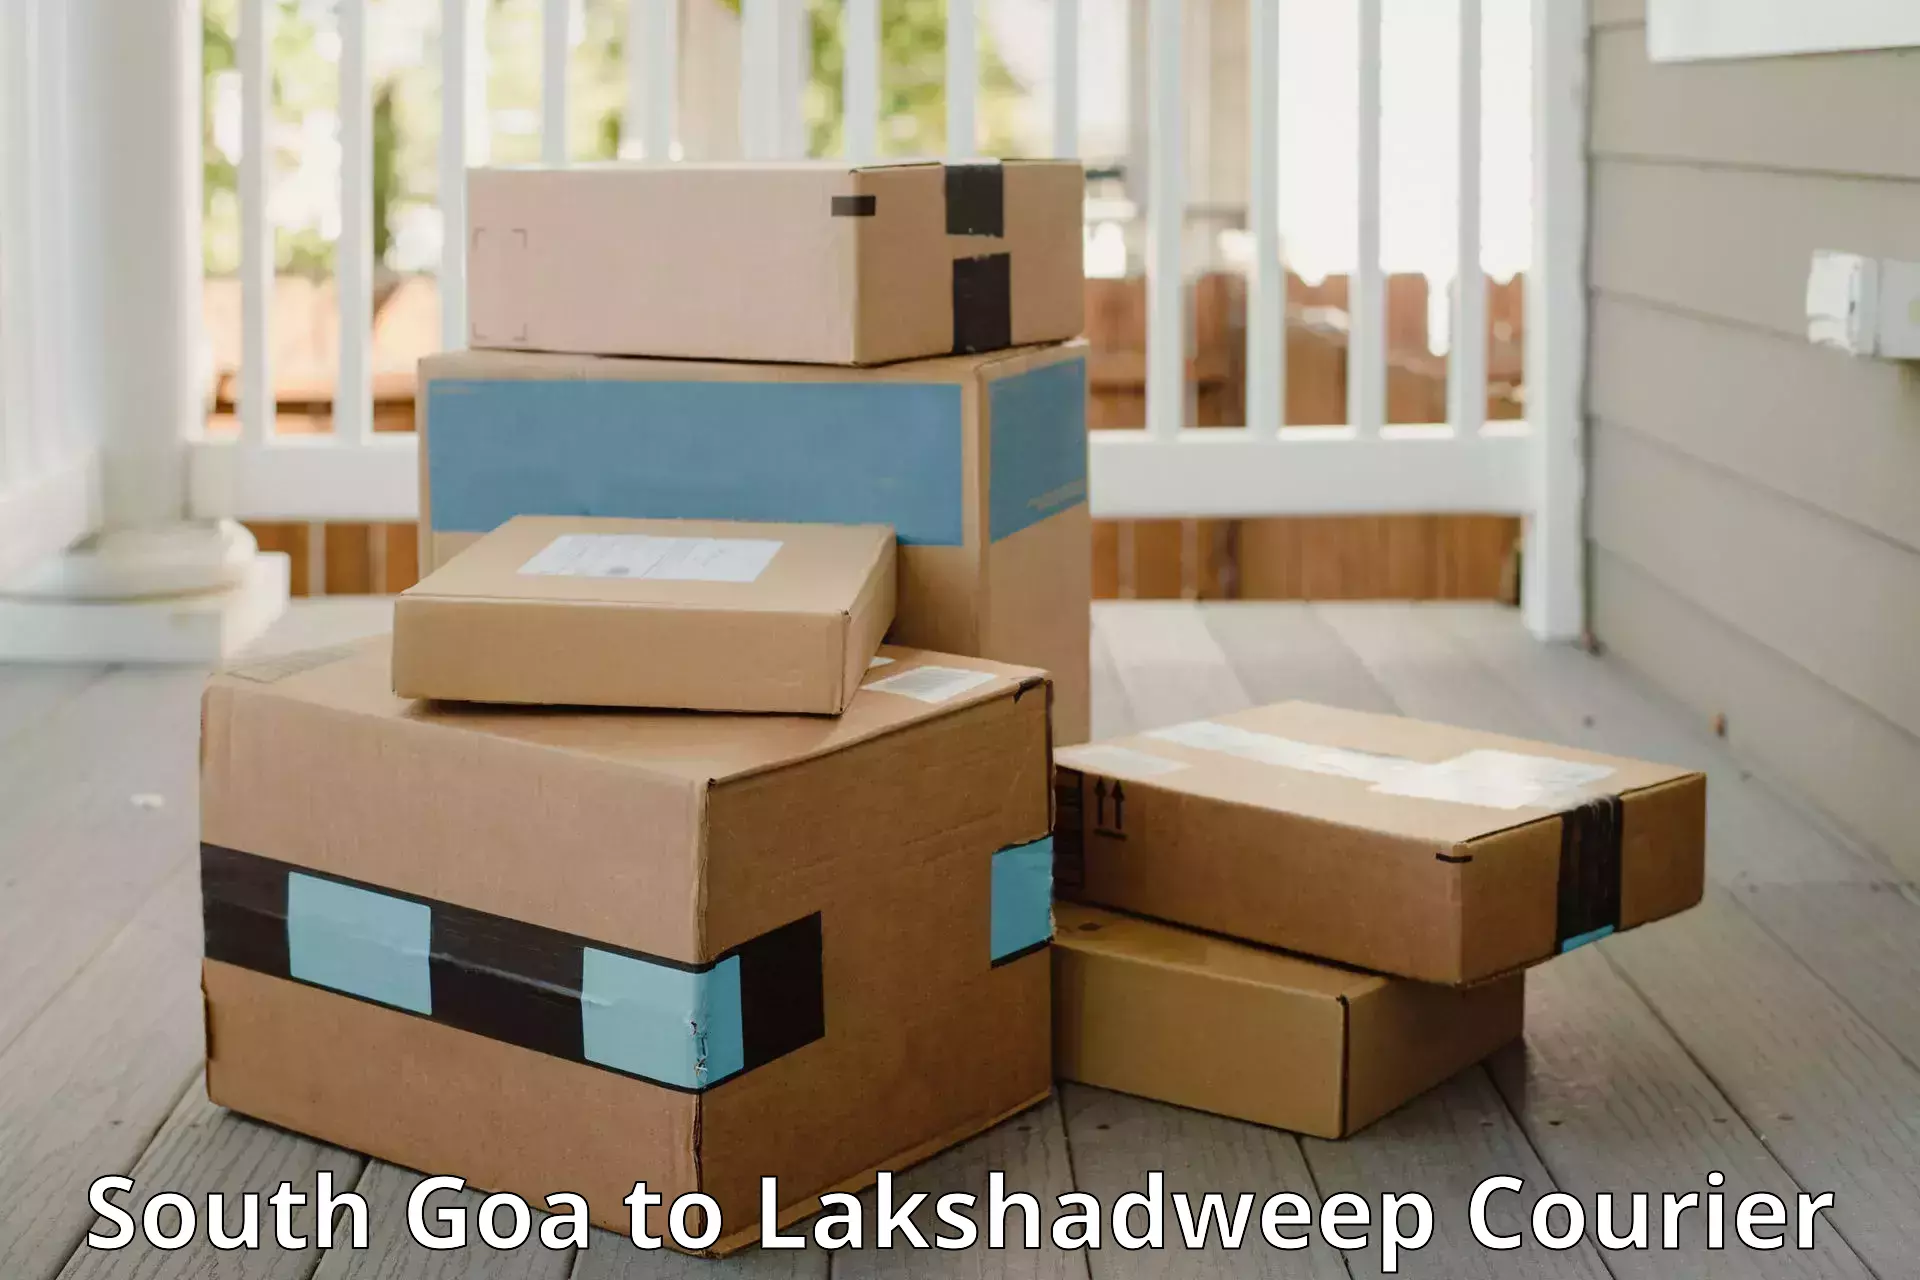 Baggage transport professionals South Goa to Lakshadweep